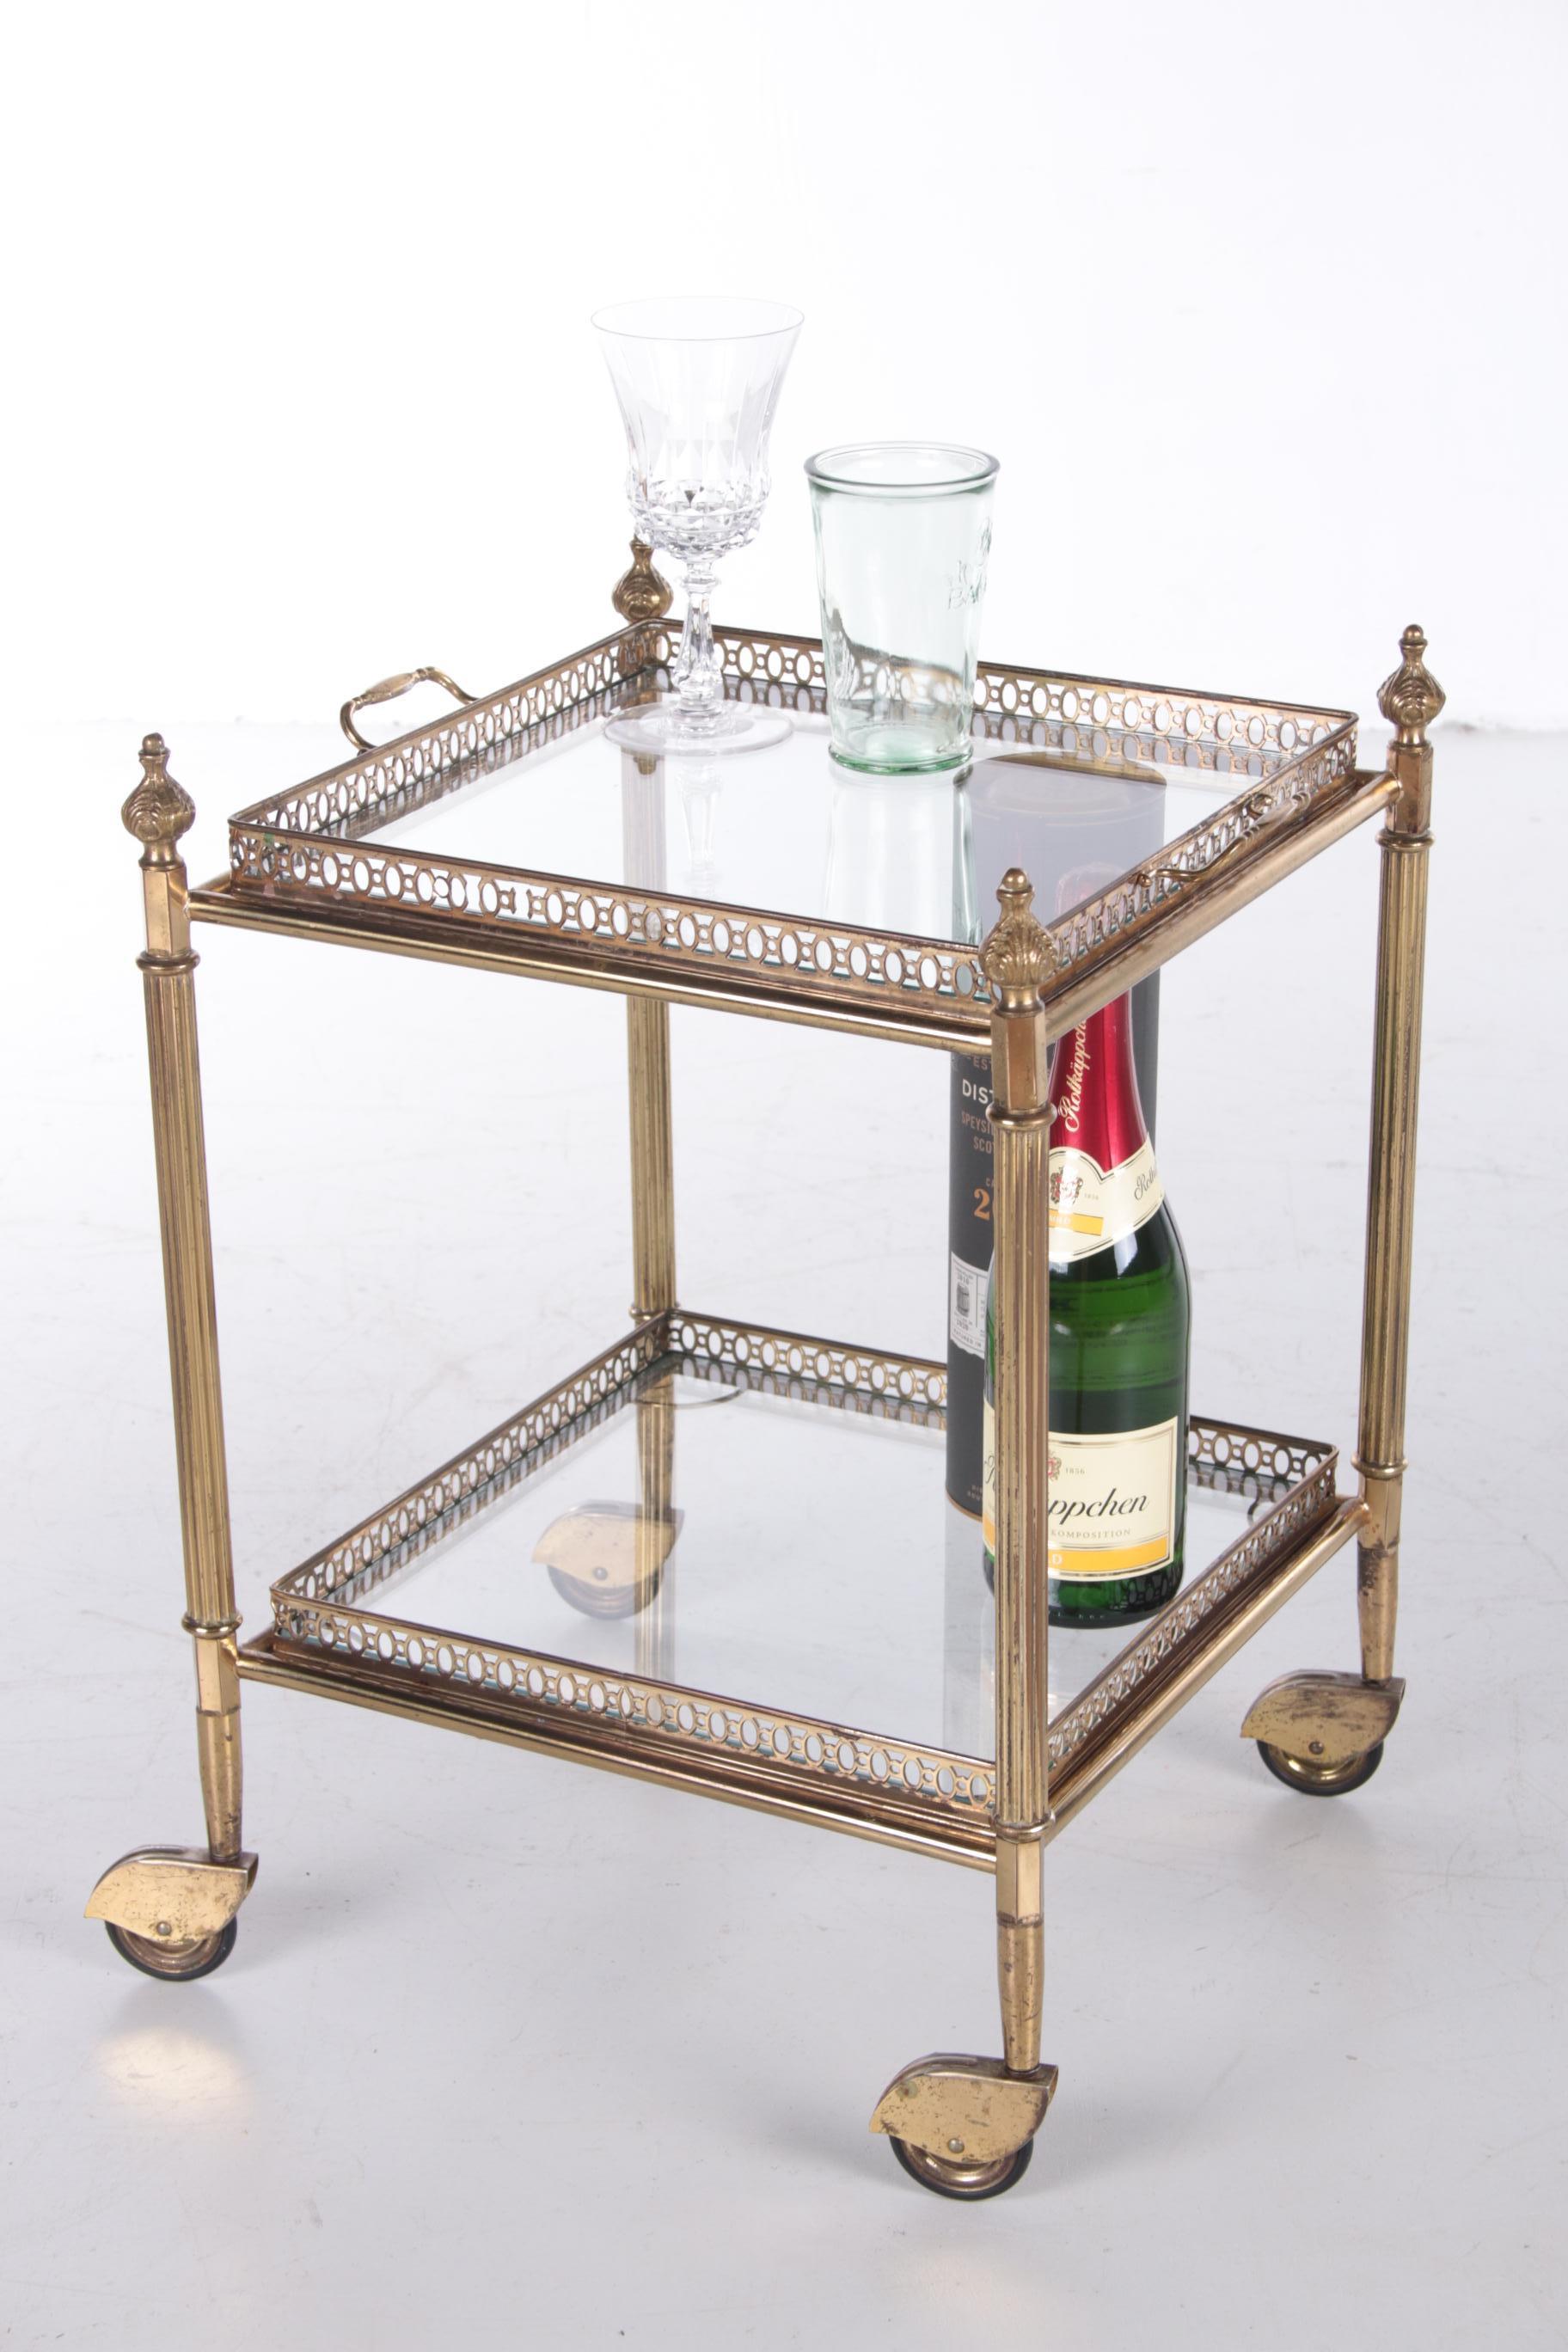 A brass serving trolley/tea trolley vintage with two layers. It has a nice square shape with a brass frame and glass table tops. The top and bottom tops are removable and can also be used as a tray.

Still in beautiful vintage condition. It still